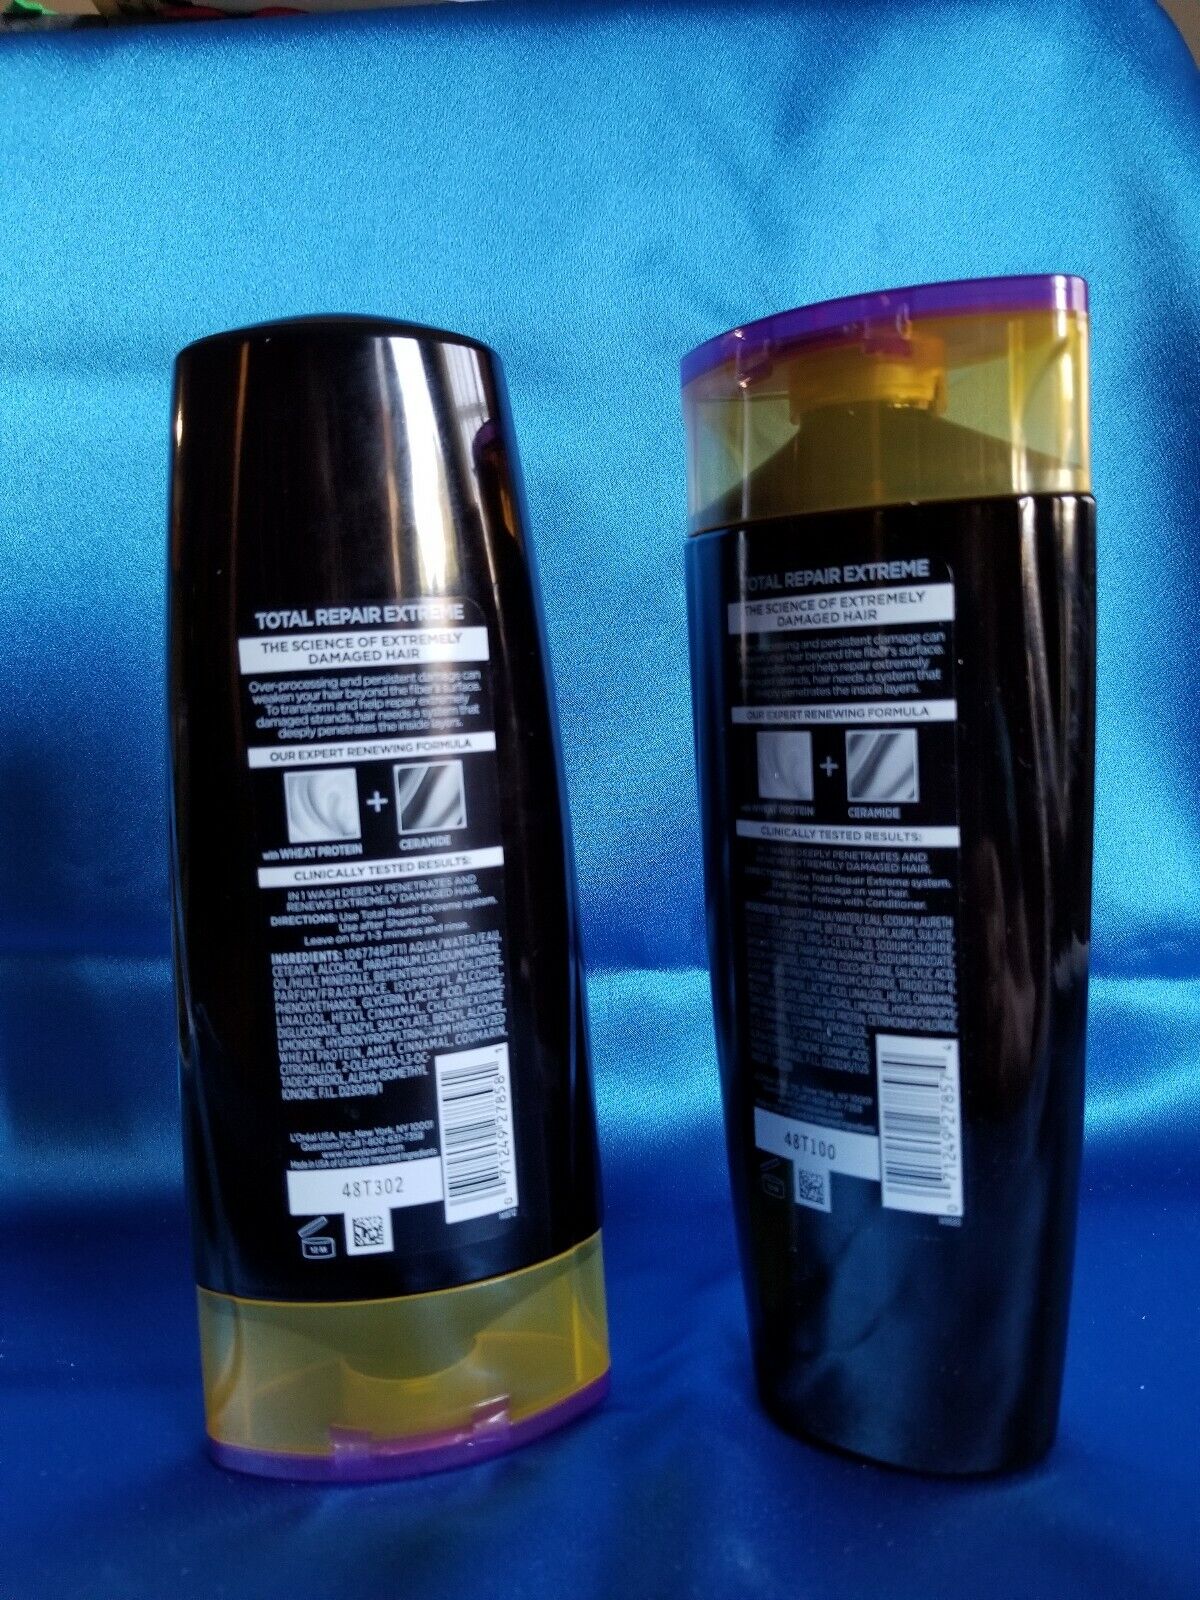 L'Oreal (Paris) ELVIVE Total Repair Extreme Renewing Shampoo and Conditioner  | eBay